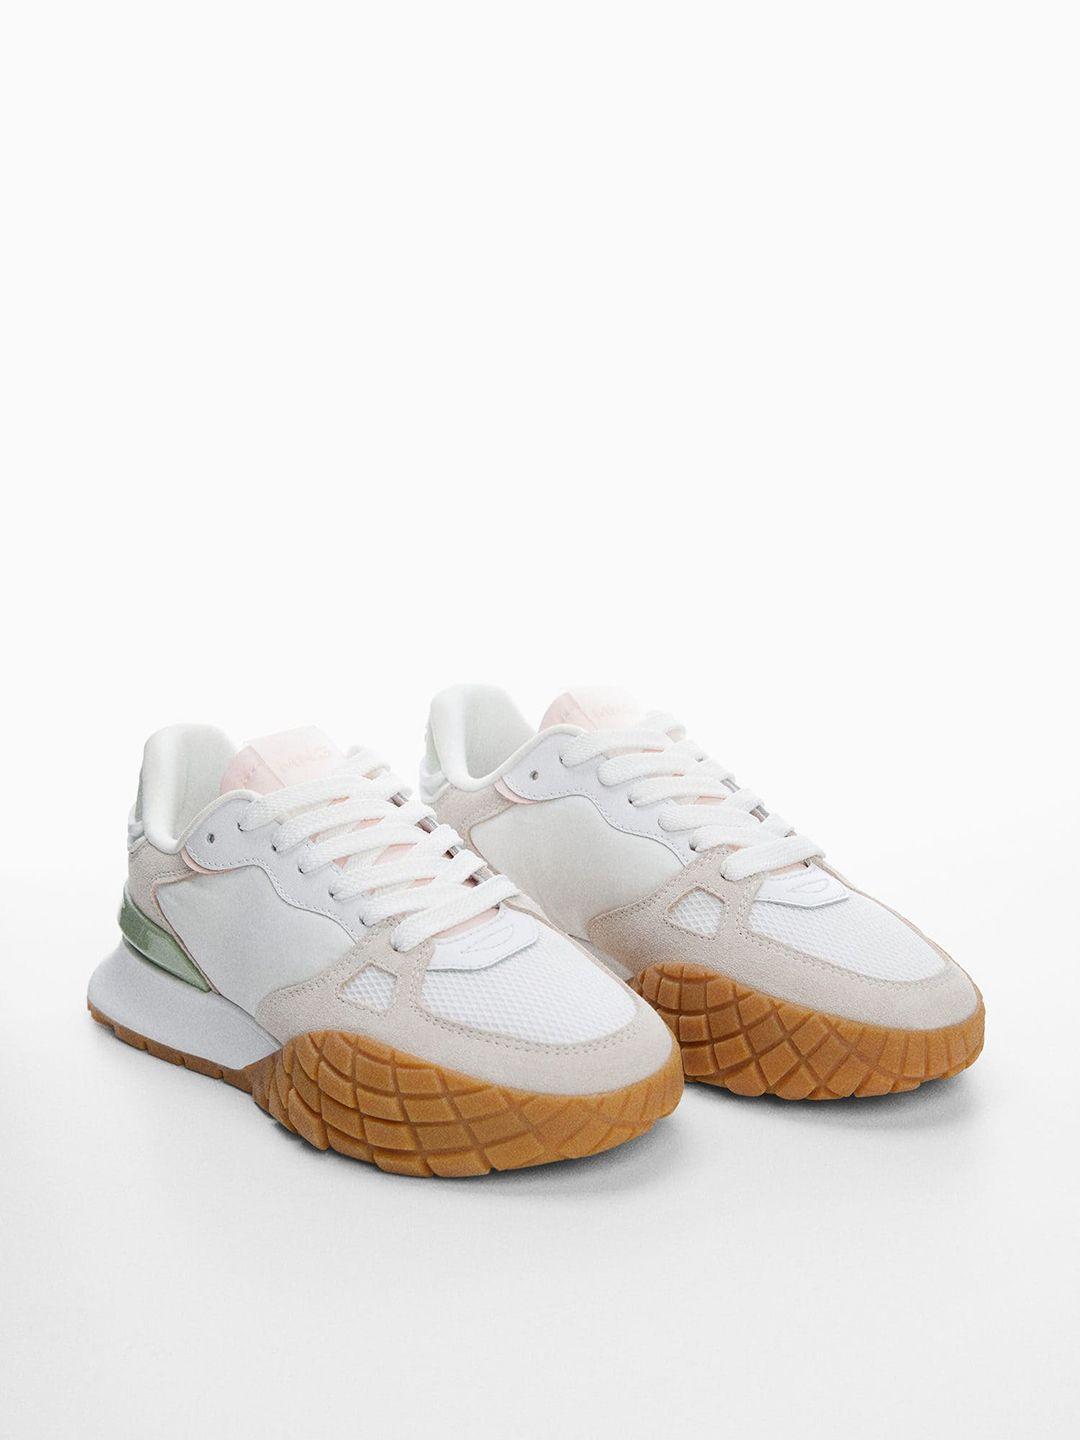 mango-women-woven-design-sustainable-aire-sports-shoes